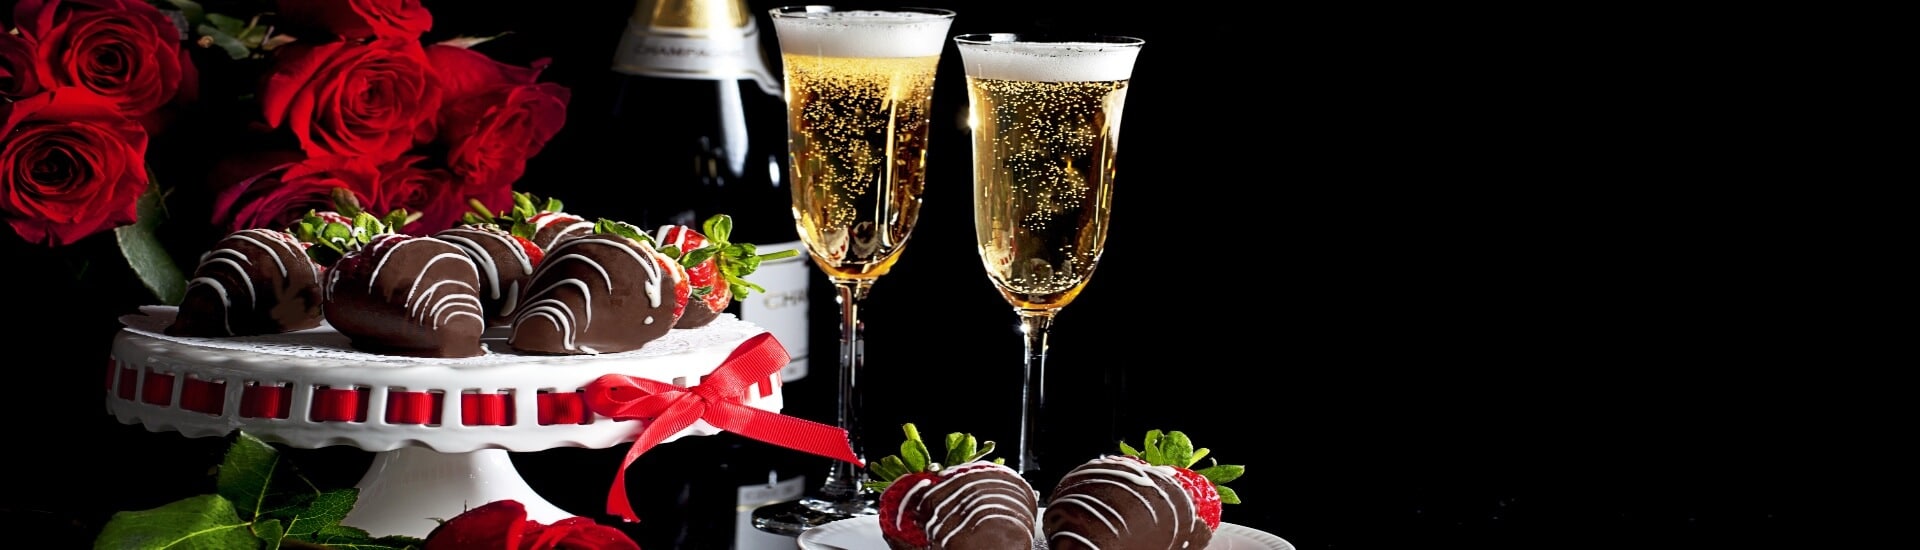 a plate of chocolate covered strawberries with a bouquet of roses and 2 glasses of champagne